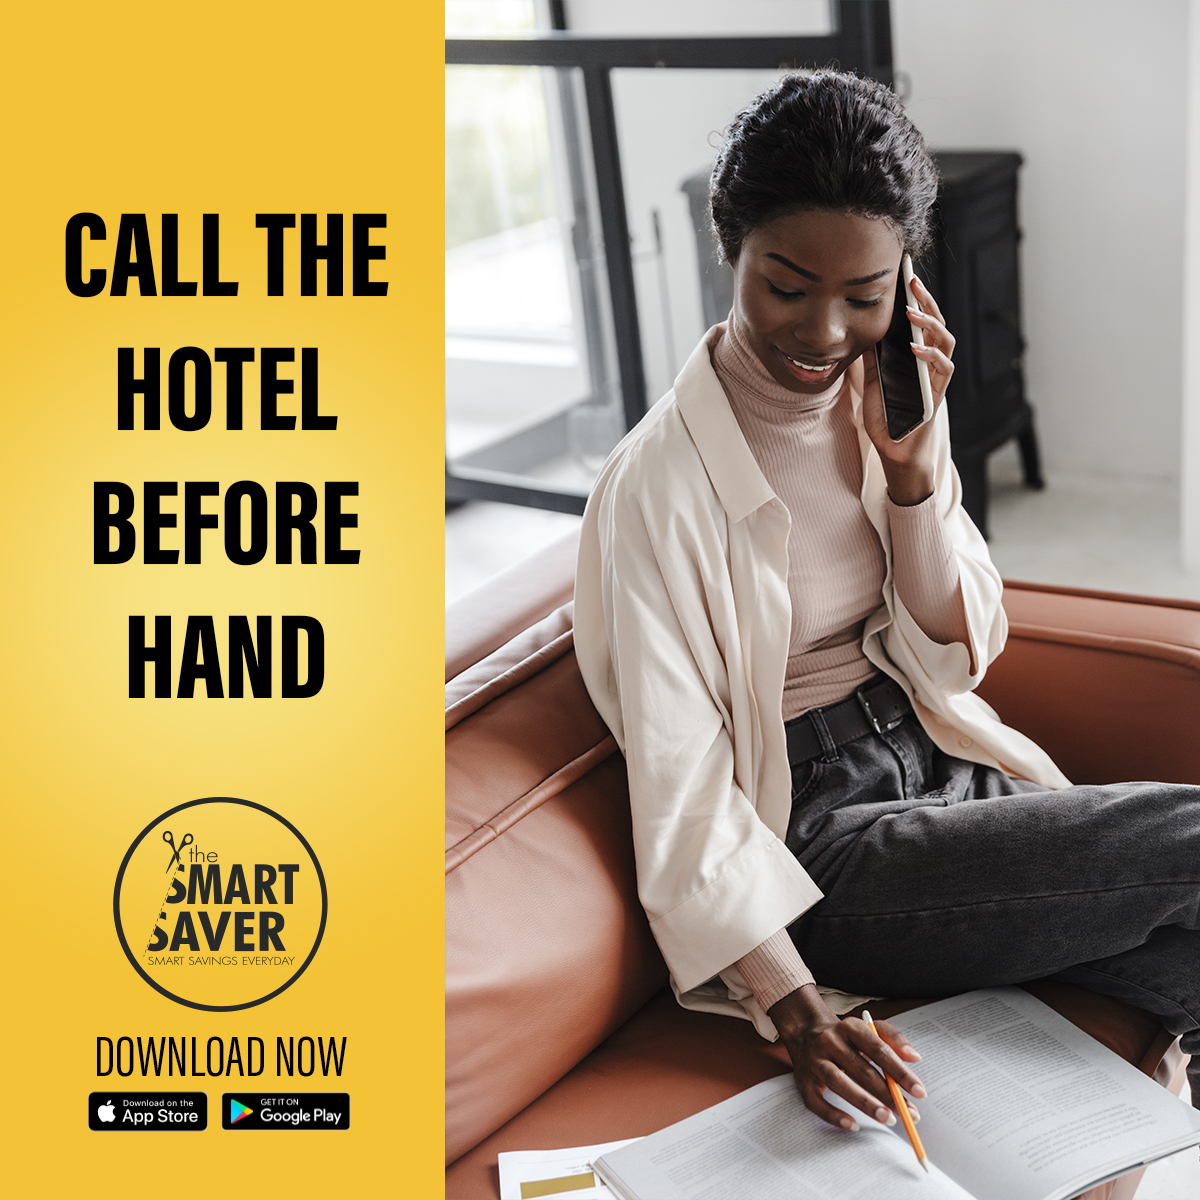 Planning to use a deal at a hotel/lodge? Confirm your booking beforehand to avoid hiccups. Use Smart Saver for smooth savings on your travels! #couponing #buyonegetonefree #downloadnow #instalnow